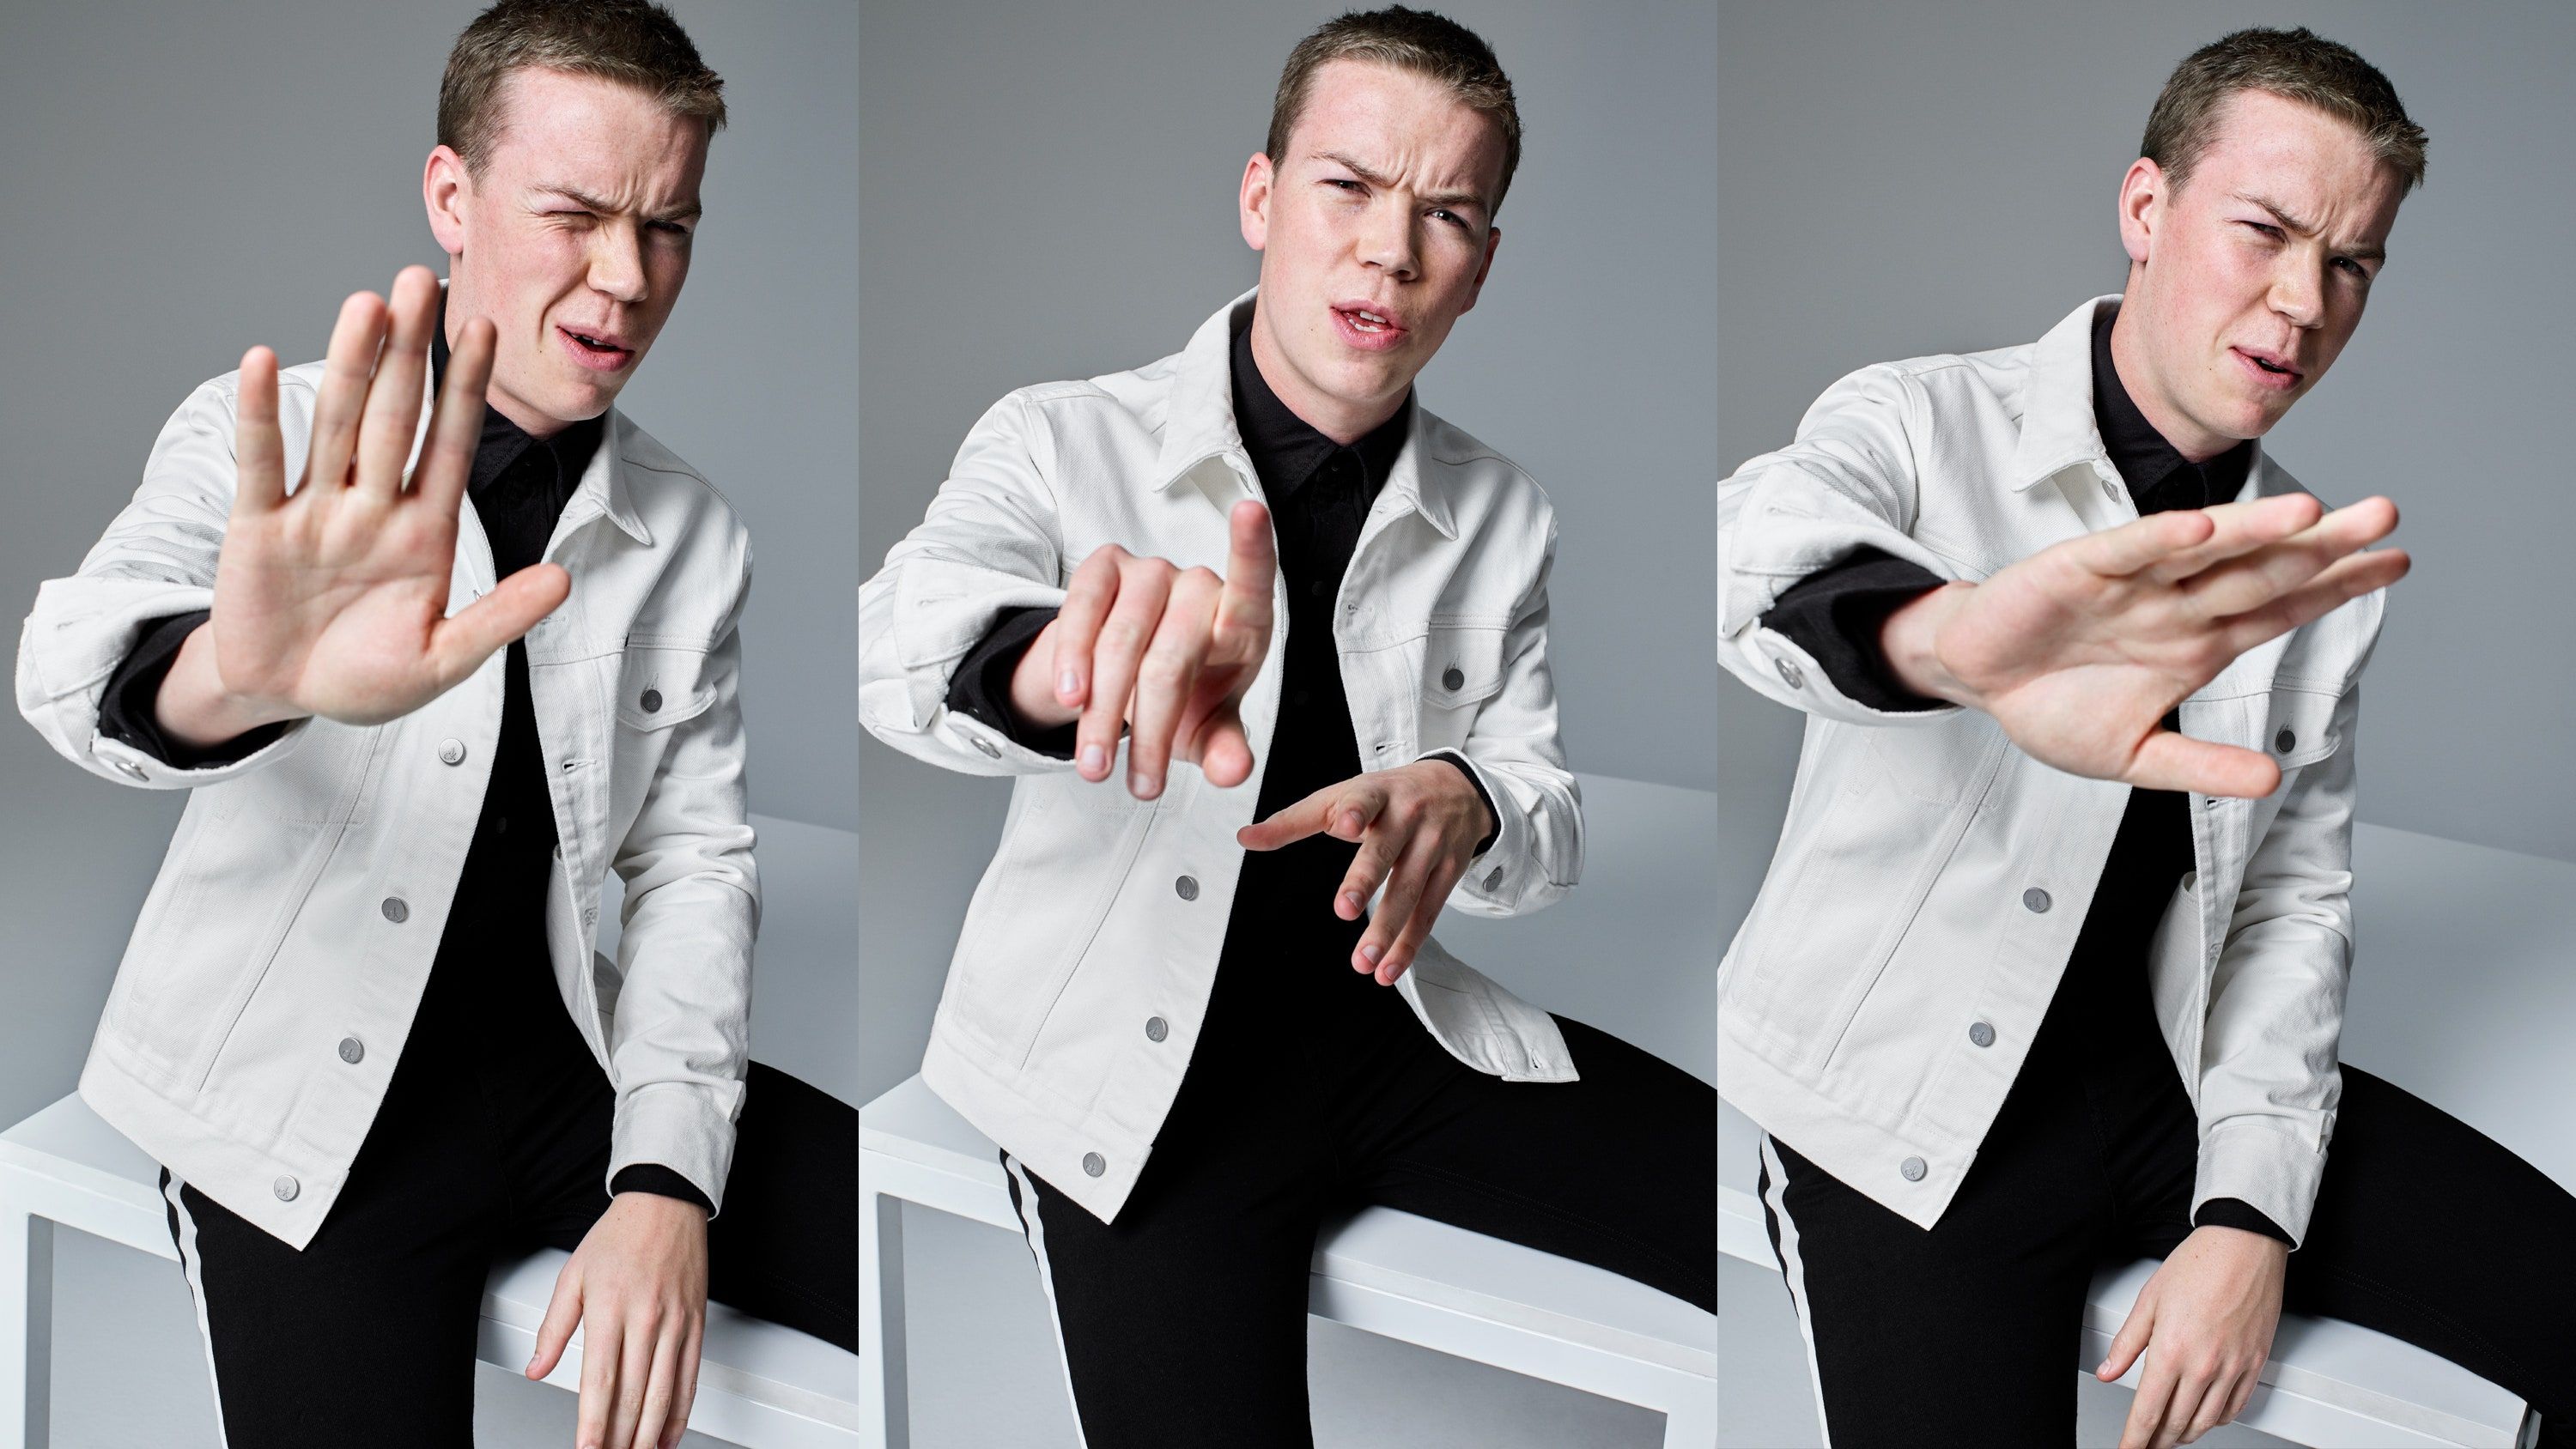 Three images of a man wearing a white jean jacket and black shirt making hand gestures - Will Poulter